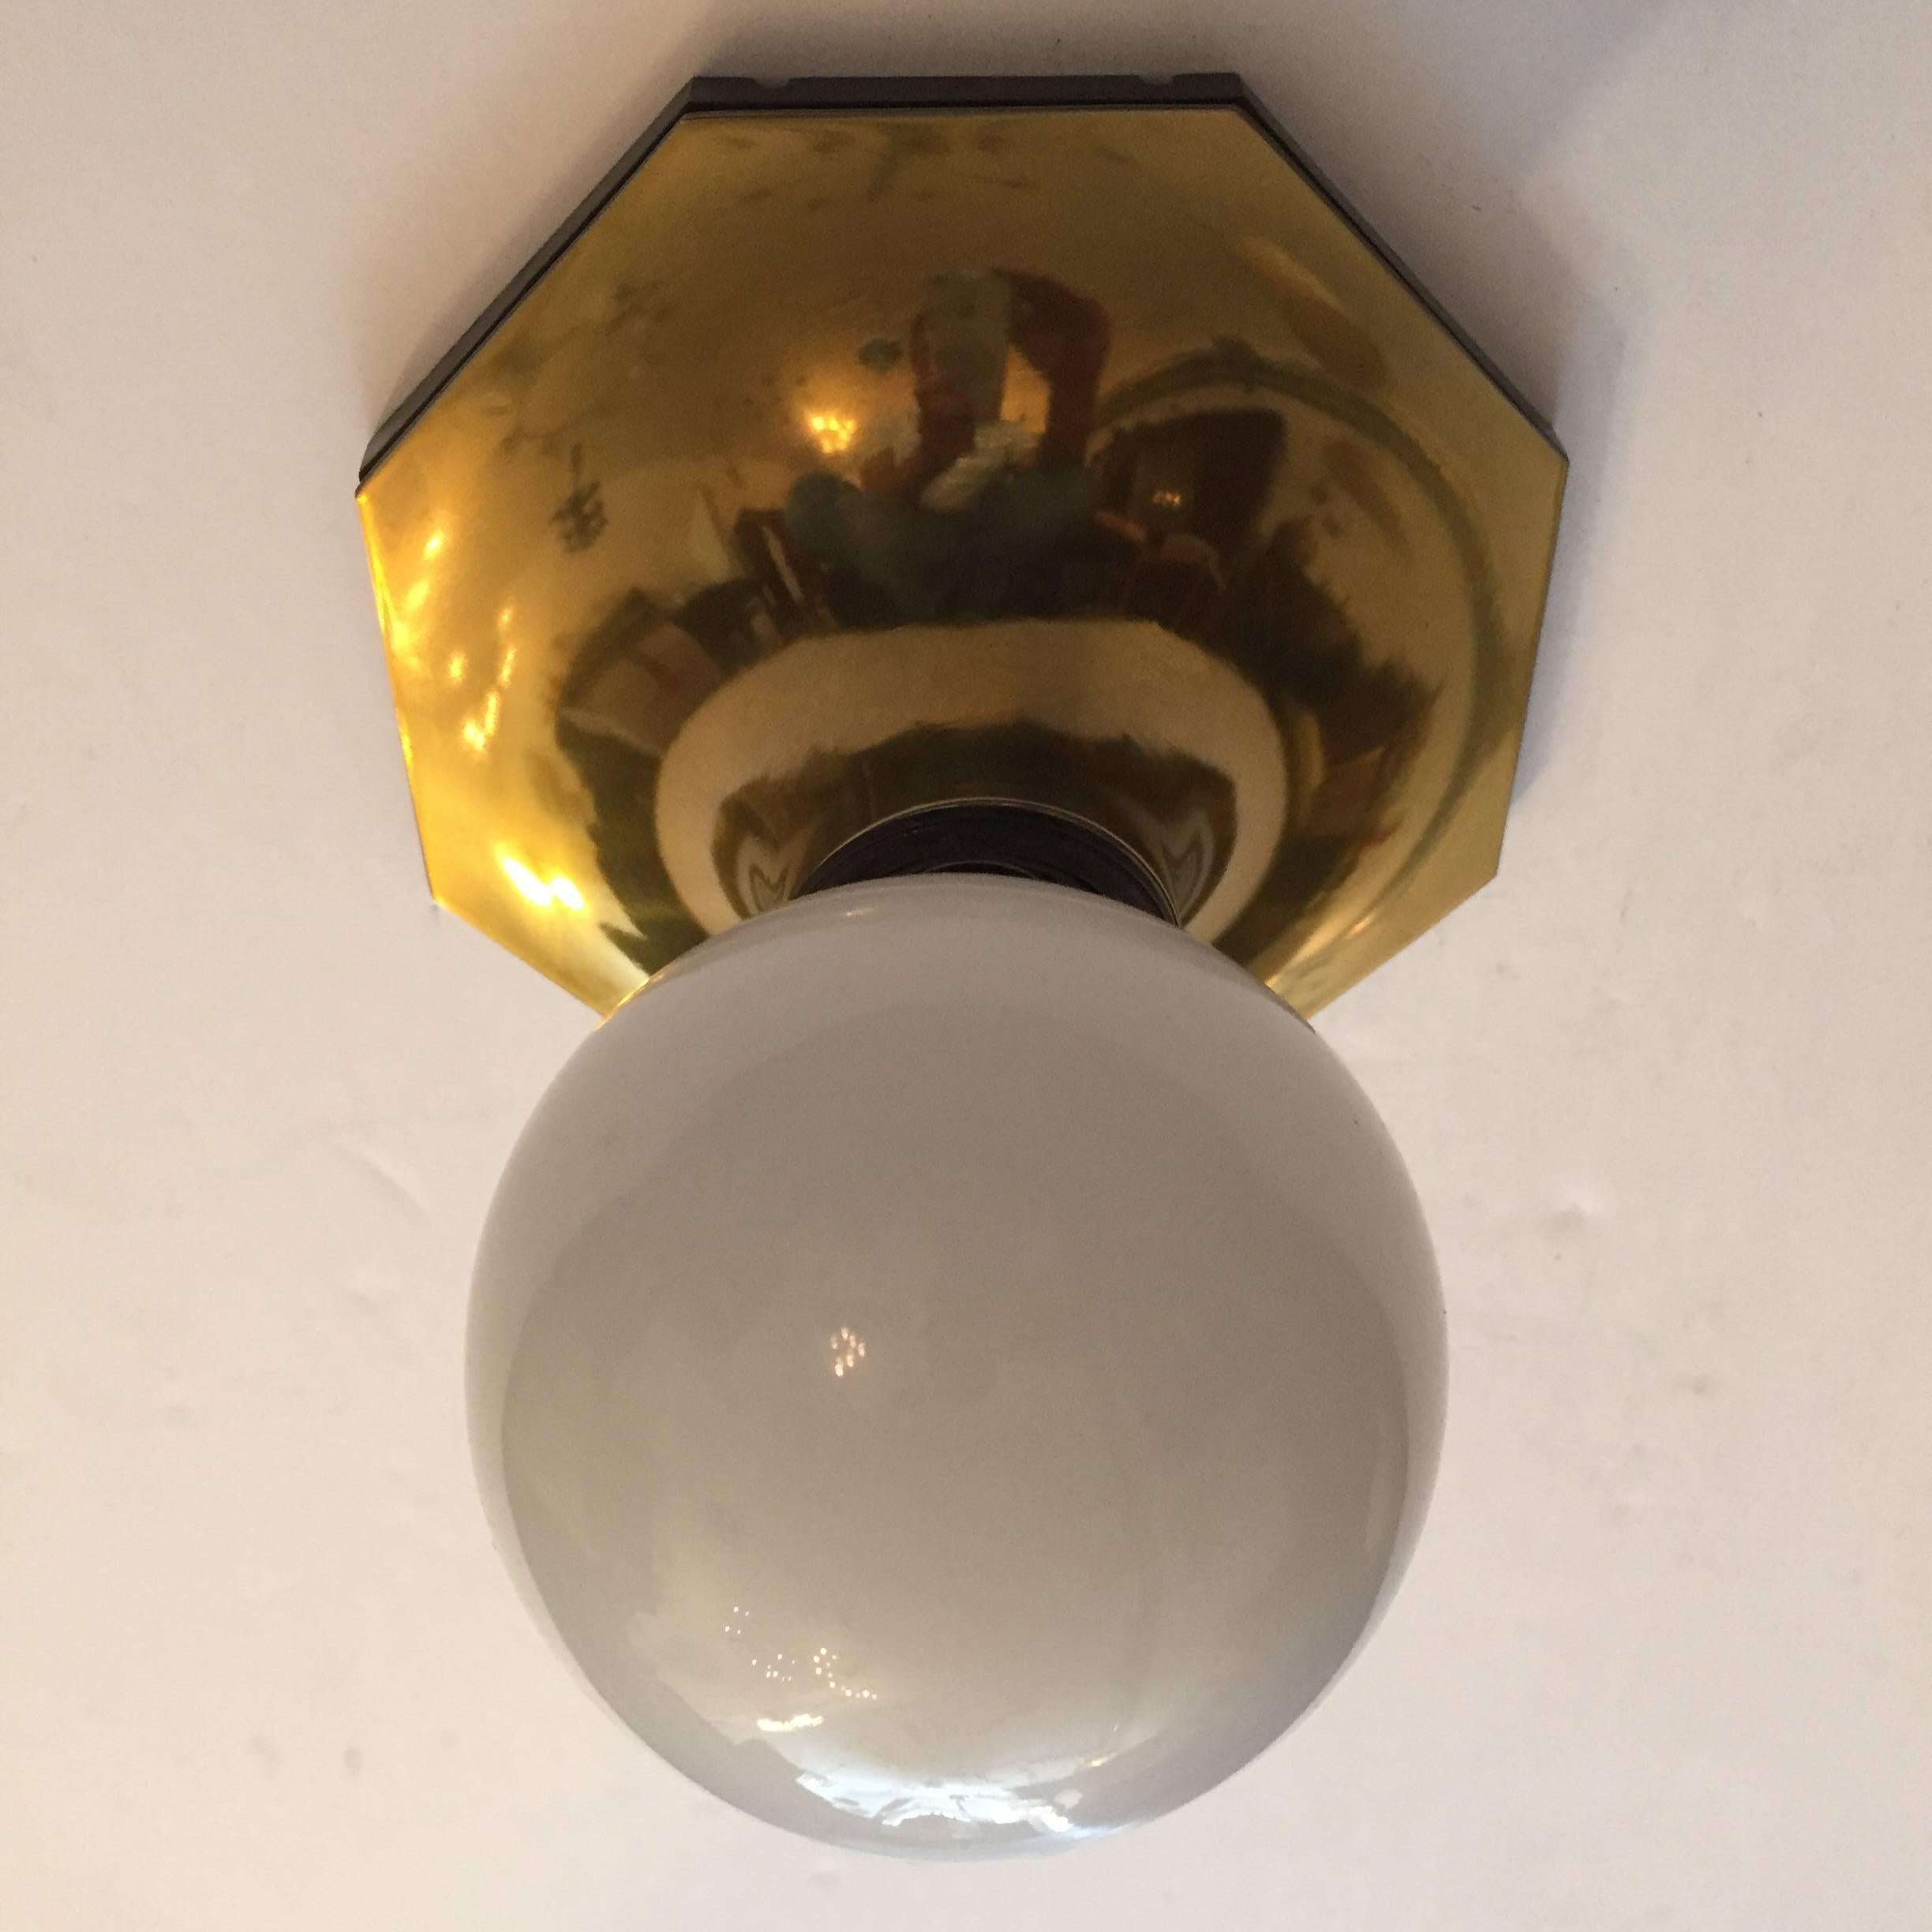 A set of 1960s Space Age flush ceiling lights or wall sconces in a high polish gold enamel by Motoko Ishii for Staff. Standard sockets. Newly rewired.